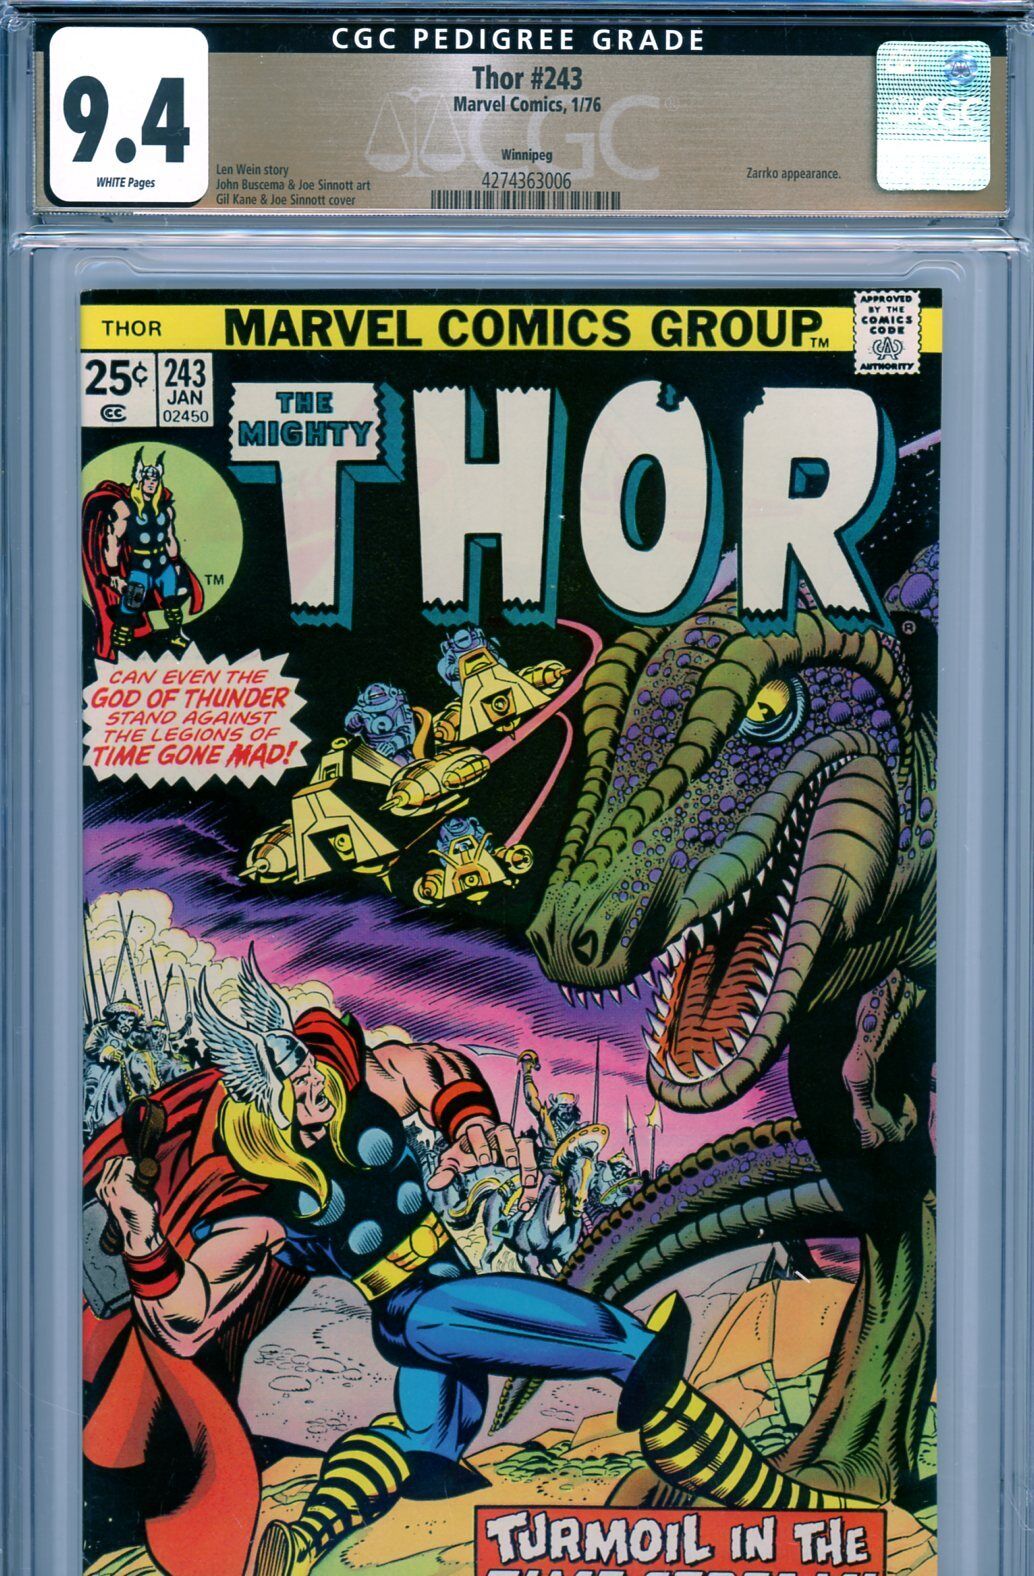 Thor #243 CGC 9.4 - PEDIGREE - Zarrko appearance - 1st app. of the Time-Twisters